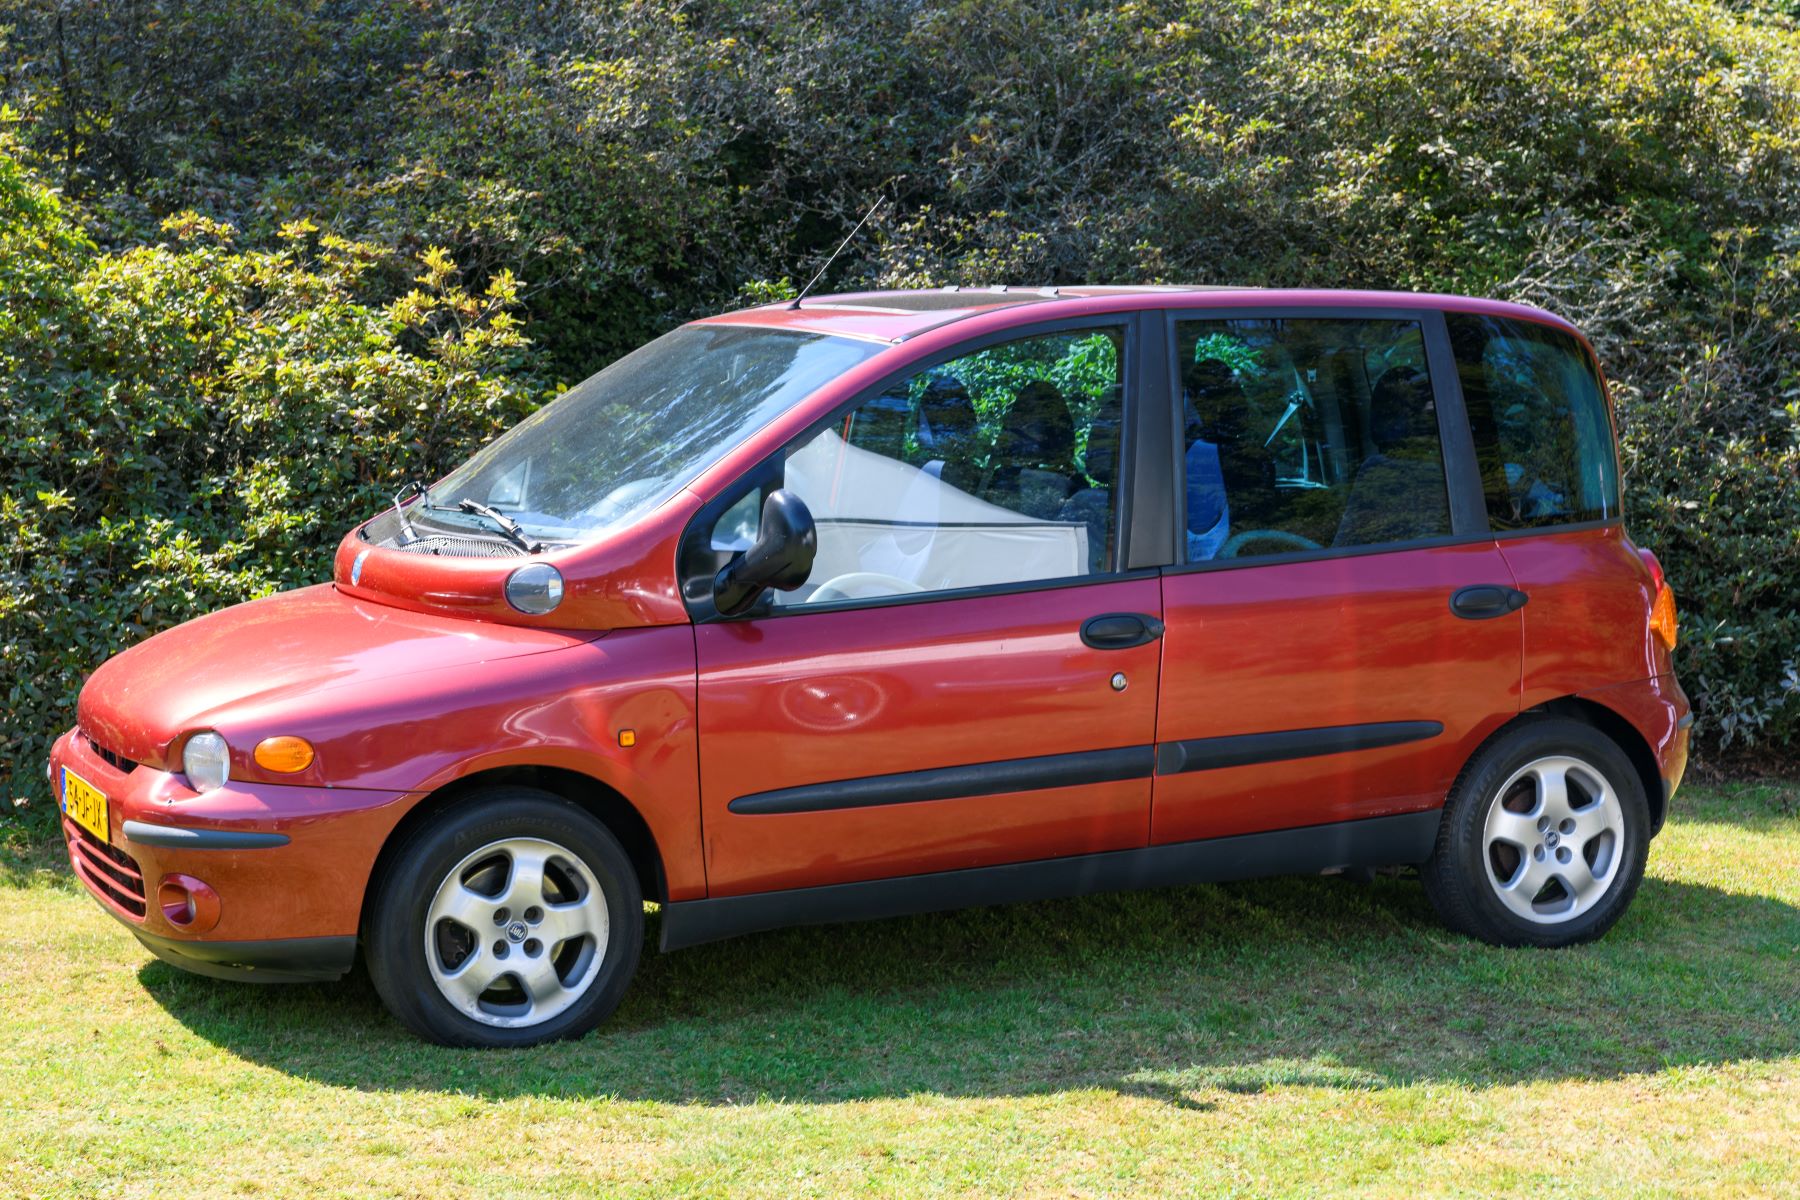 A red Fiat Multipla MPV model on display at the 2019 Concours d'Elegance at palace Soestdijk in Baarn, Netherlands